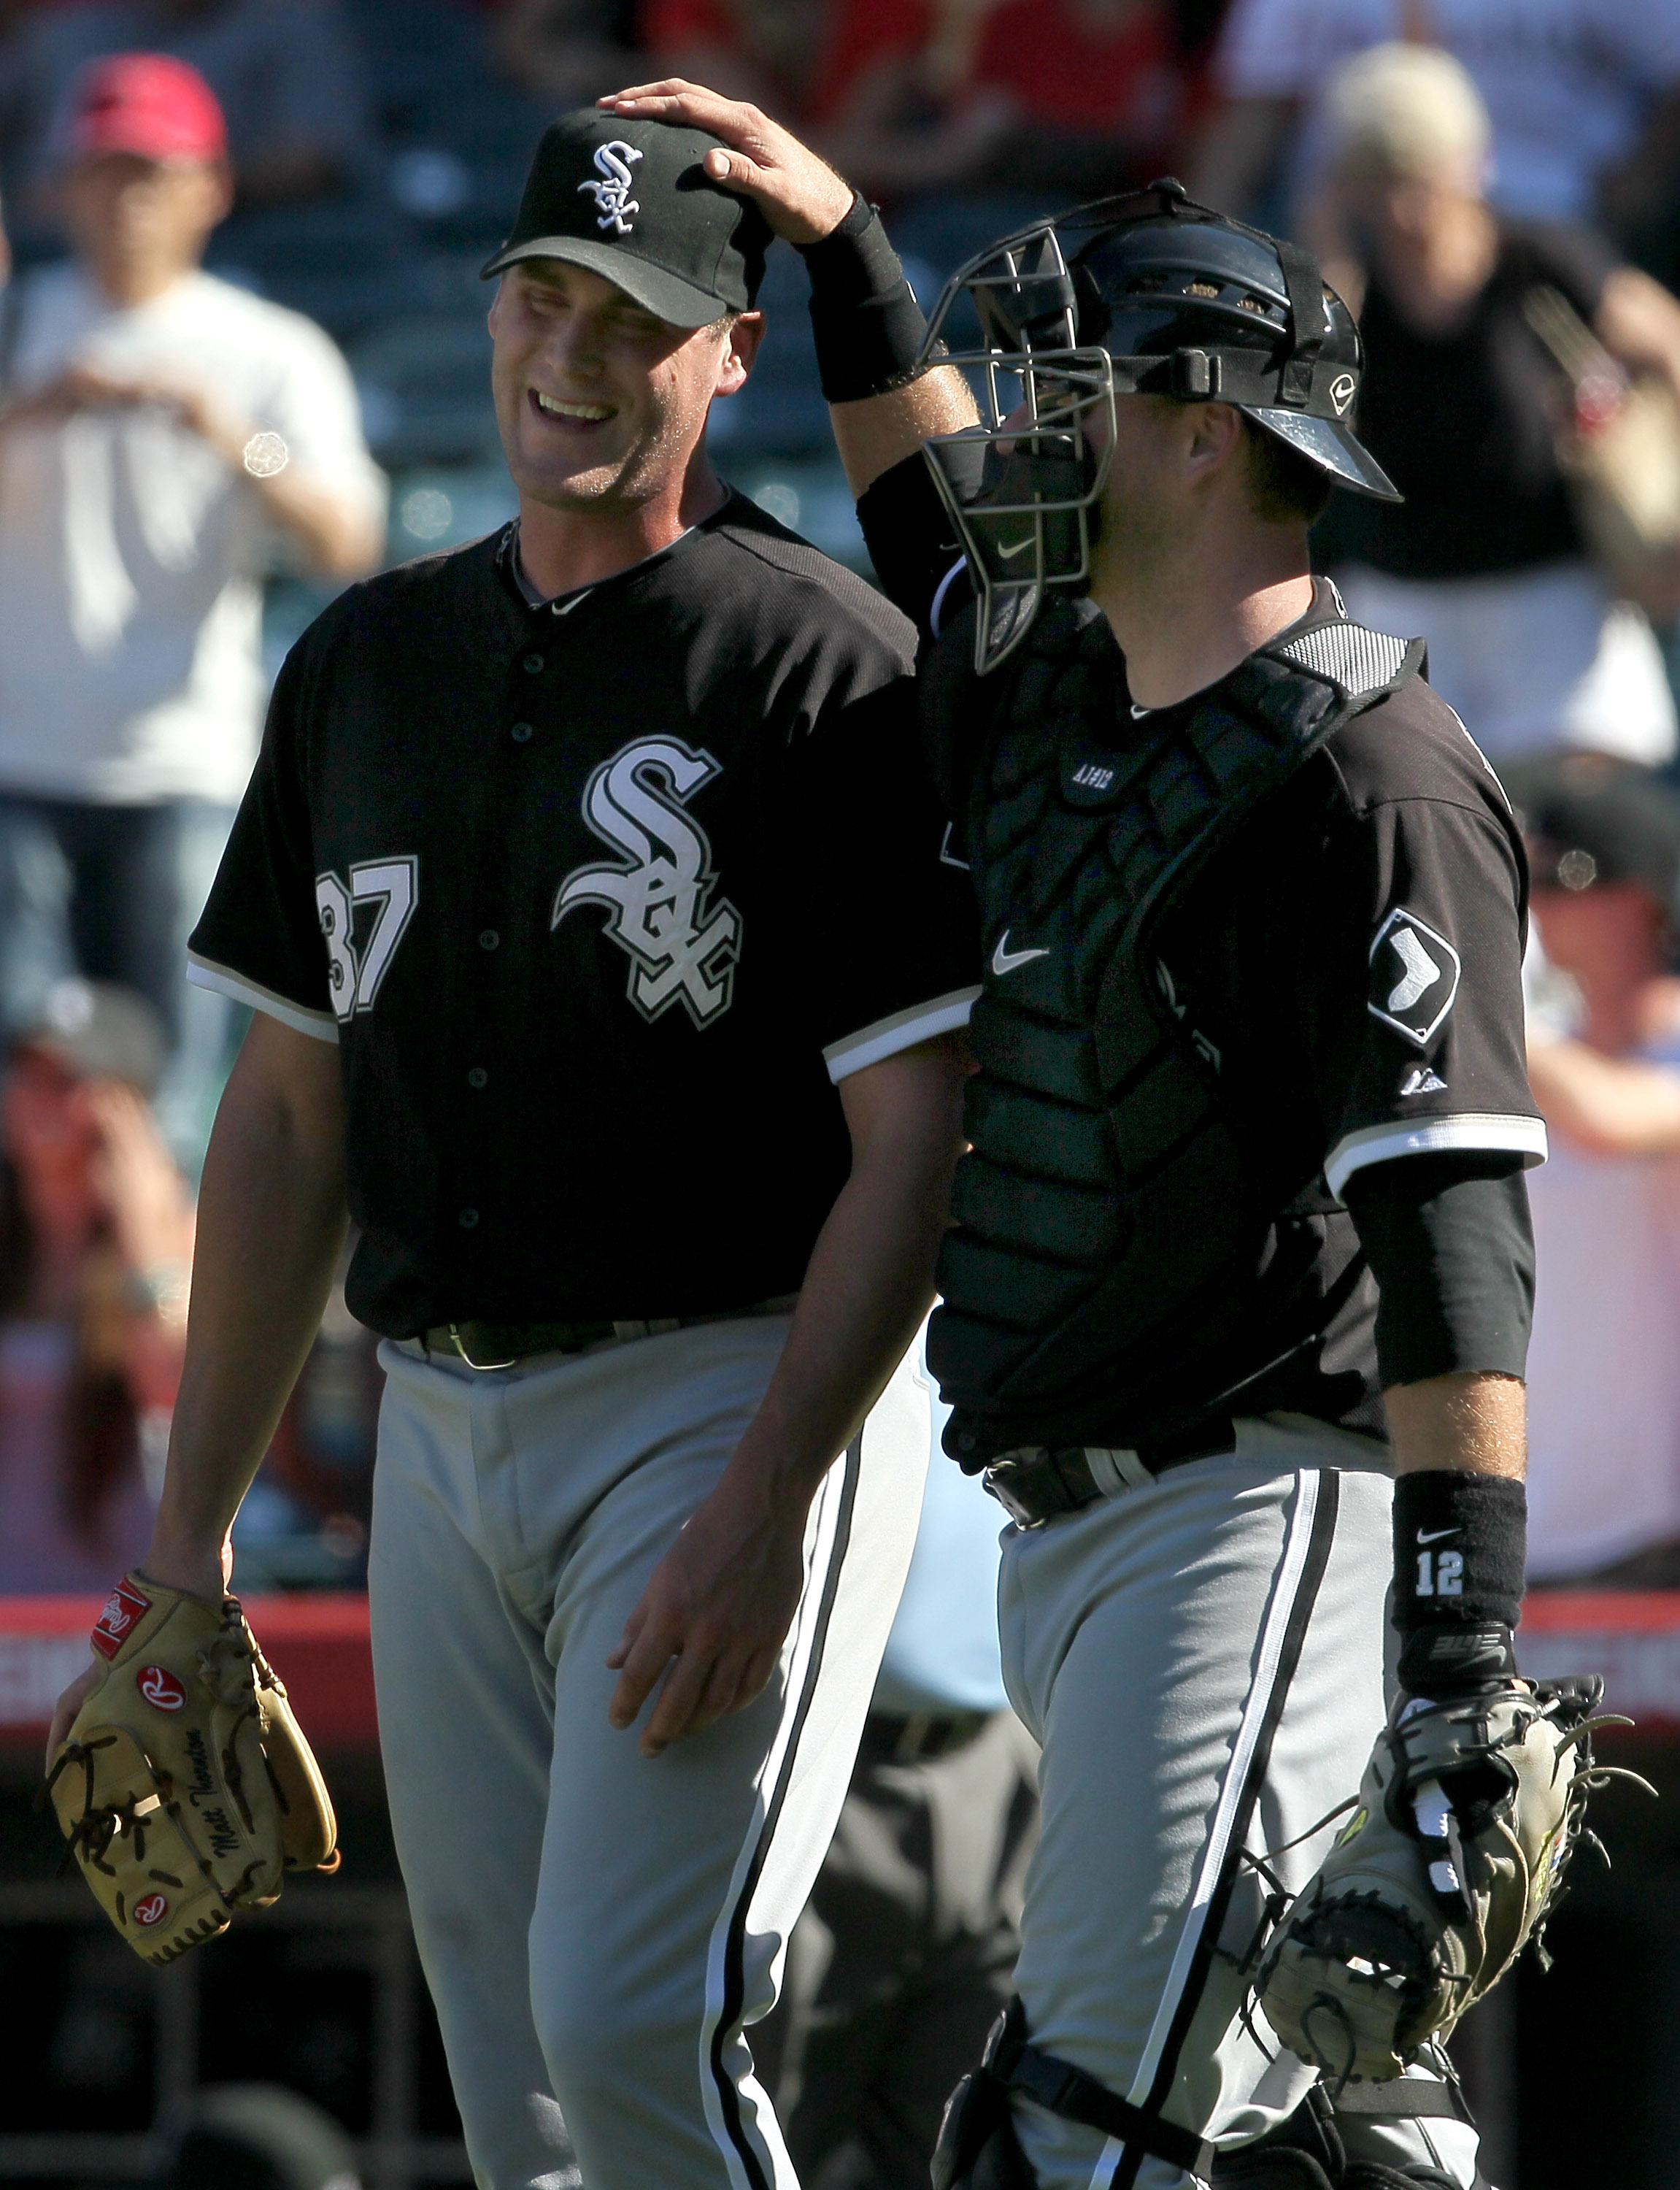 ANAHEIM, CA - SEPTEMBER 26:  Pitcher Matt Thornton #37 of the Chicago White Sox is greeted by catcher A.J. Pierzynski #12 after picking up the save against the Los Angeles Angels of Anaheim on September 26, 2010 at Angel Stadium in Anaheim, California. Th